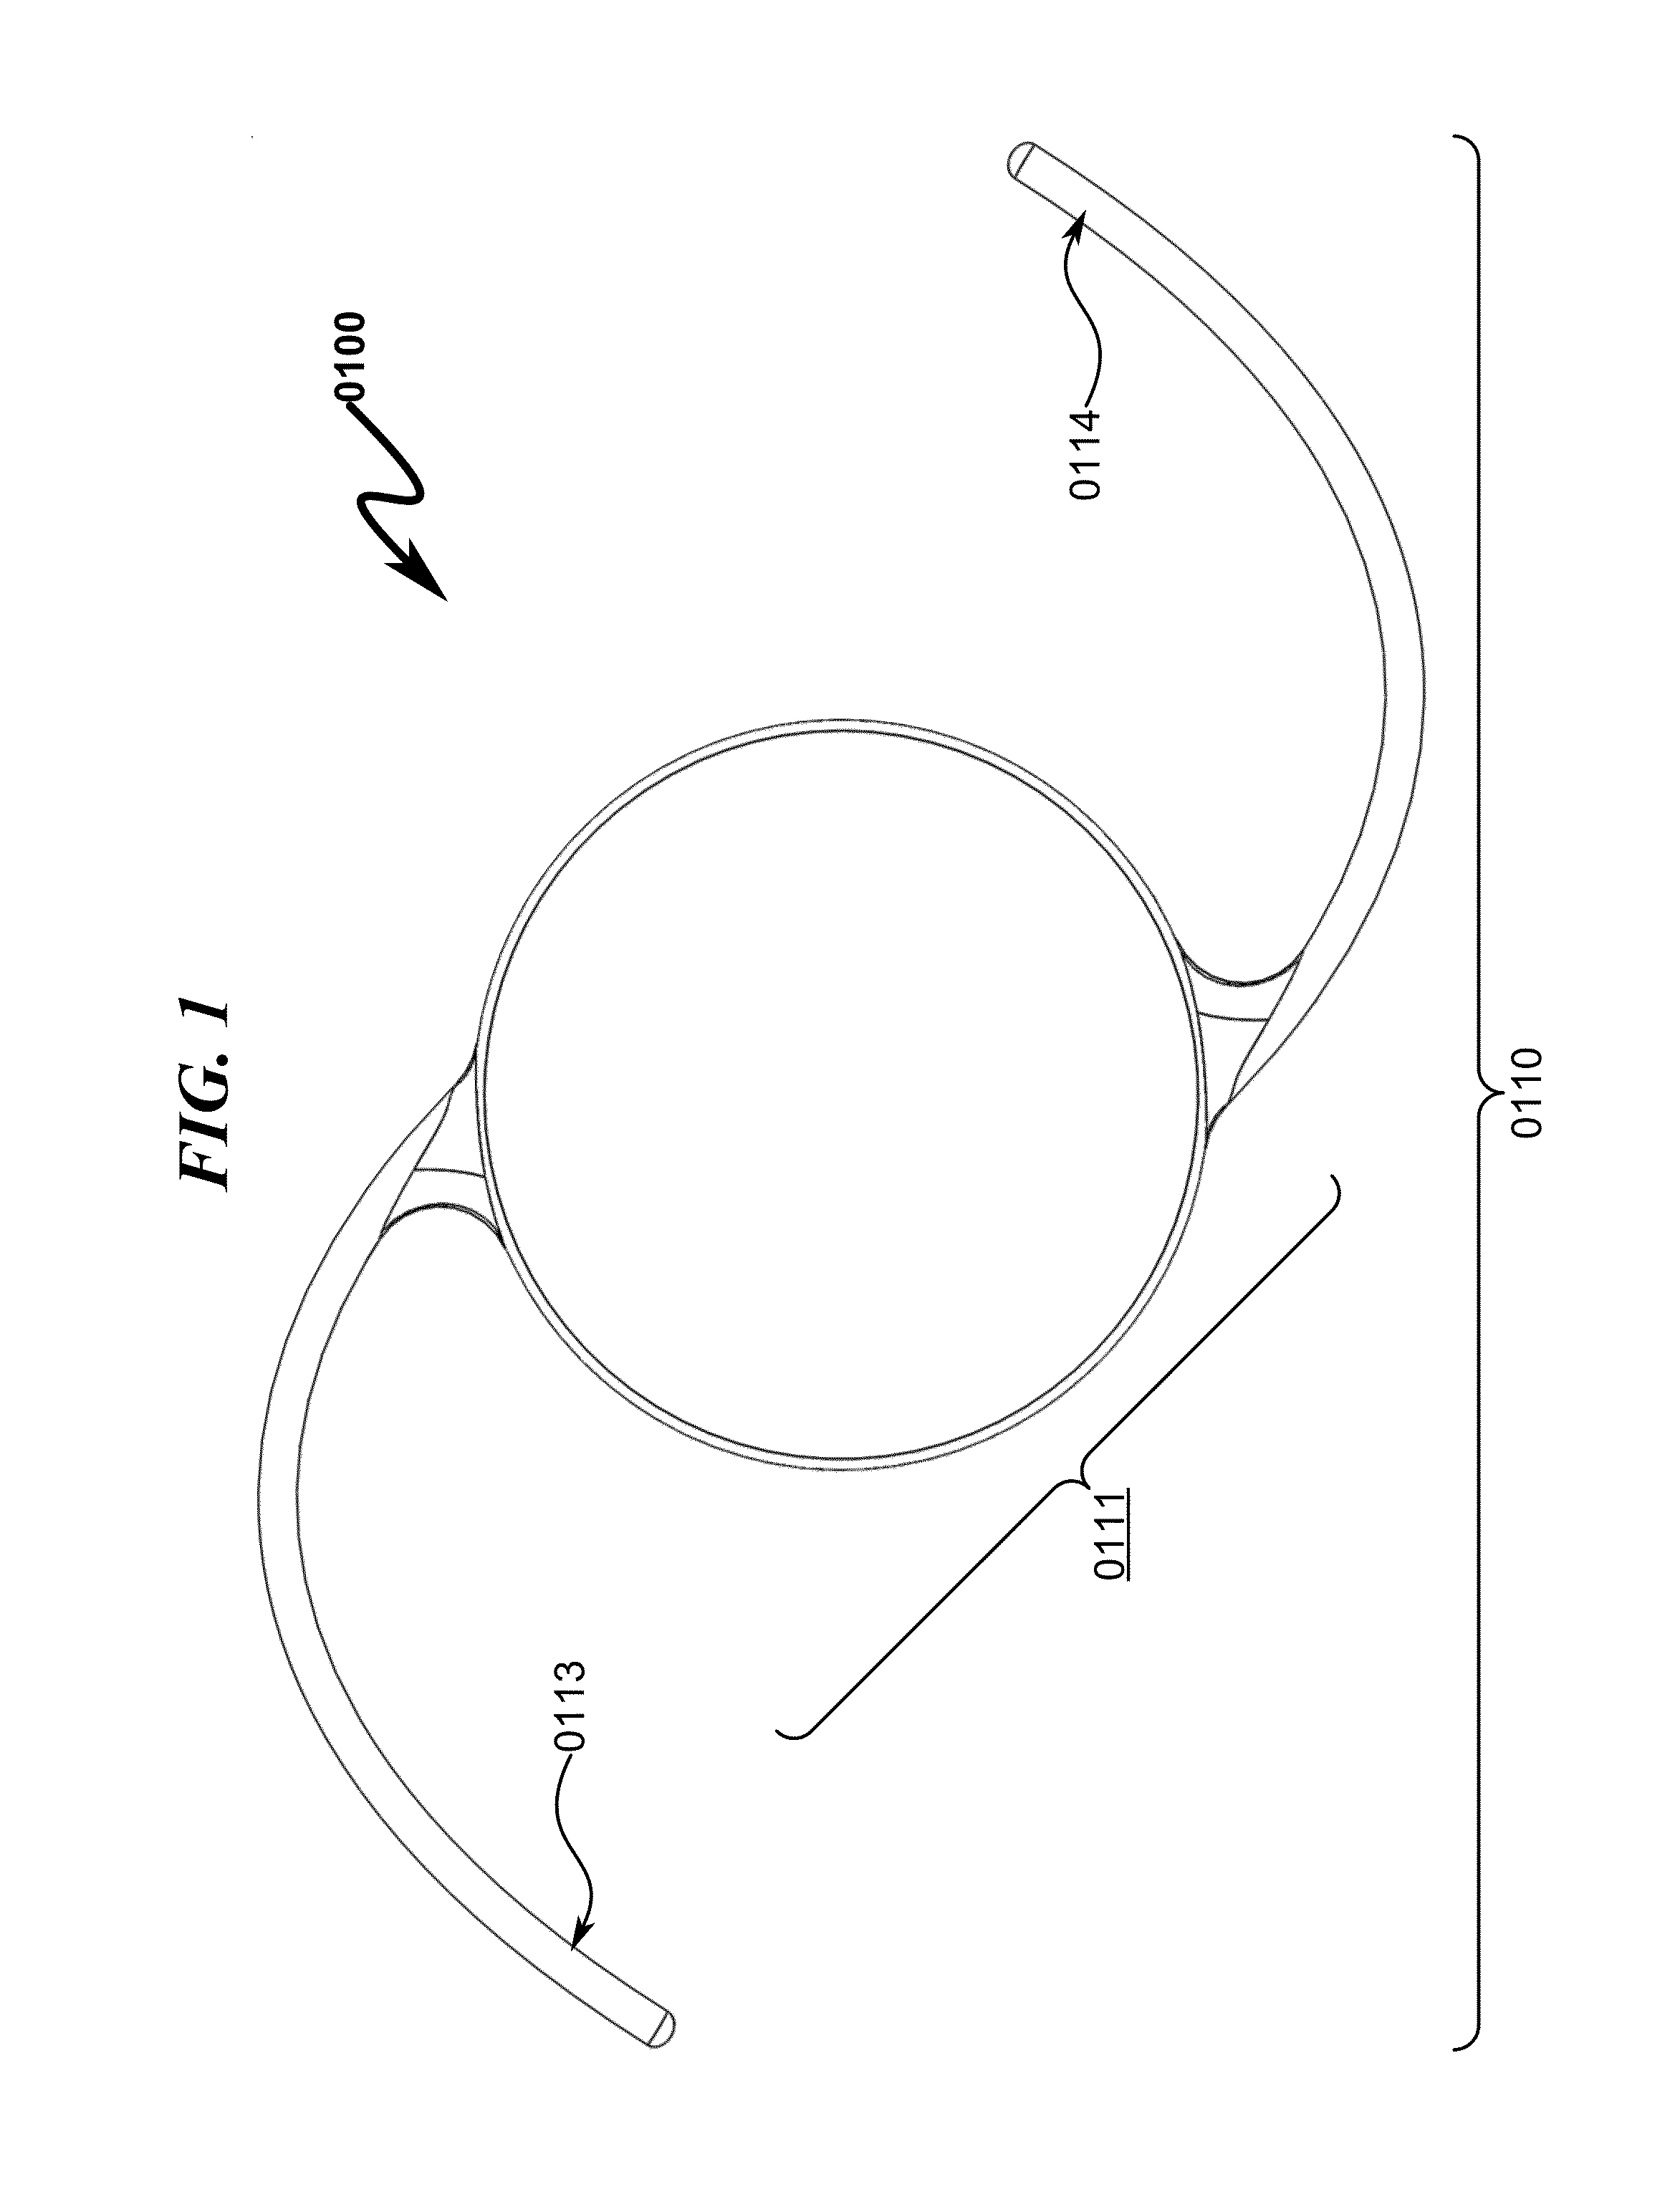 Intraocular lens (IOL) fabrication system and method